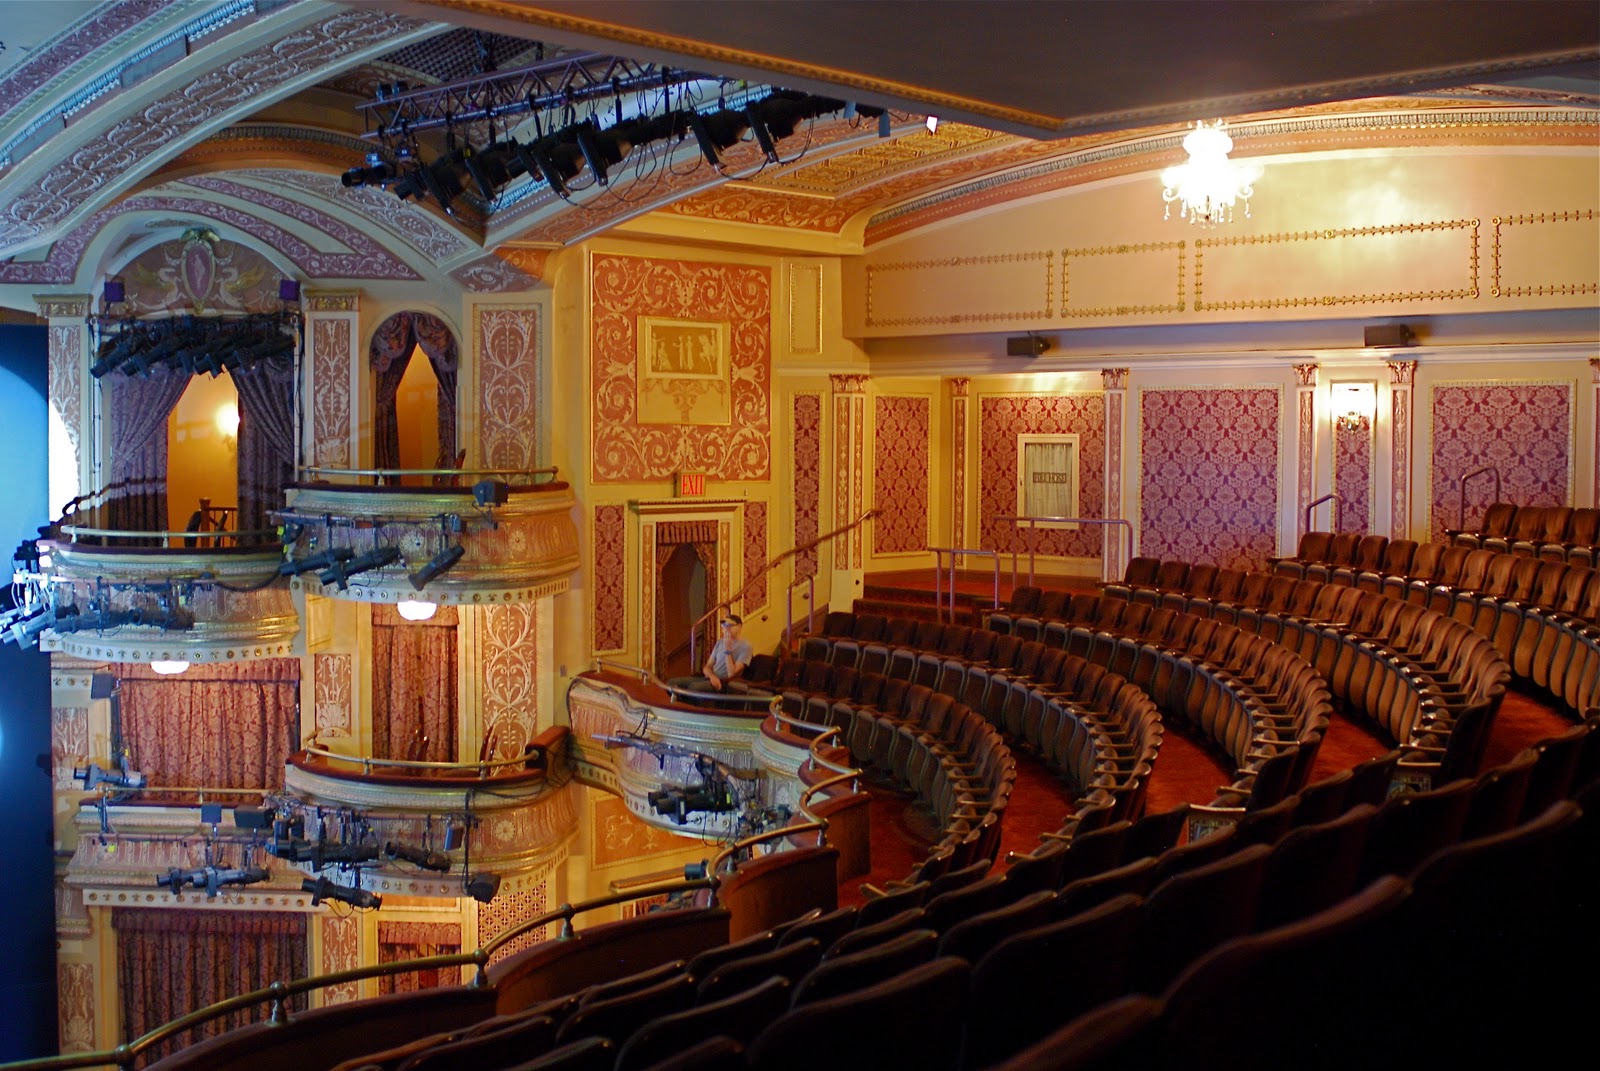 Broadway Open House Theatre Tours - Winter Garden (Mamma Mia) and August Wi...